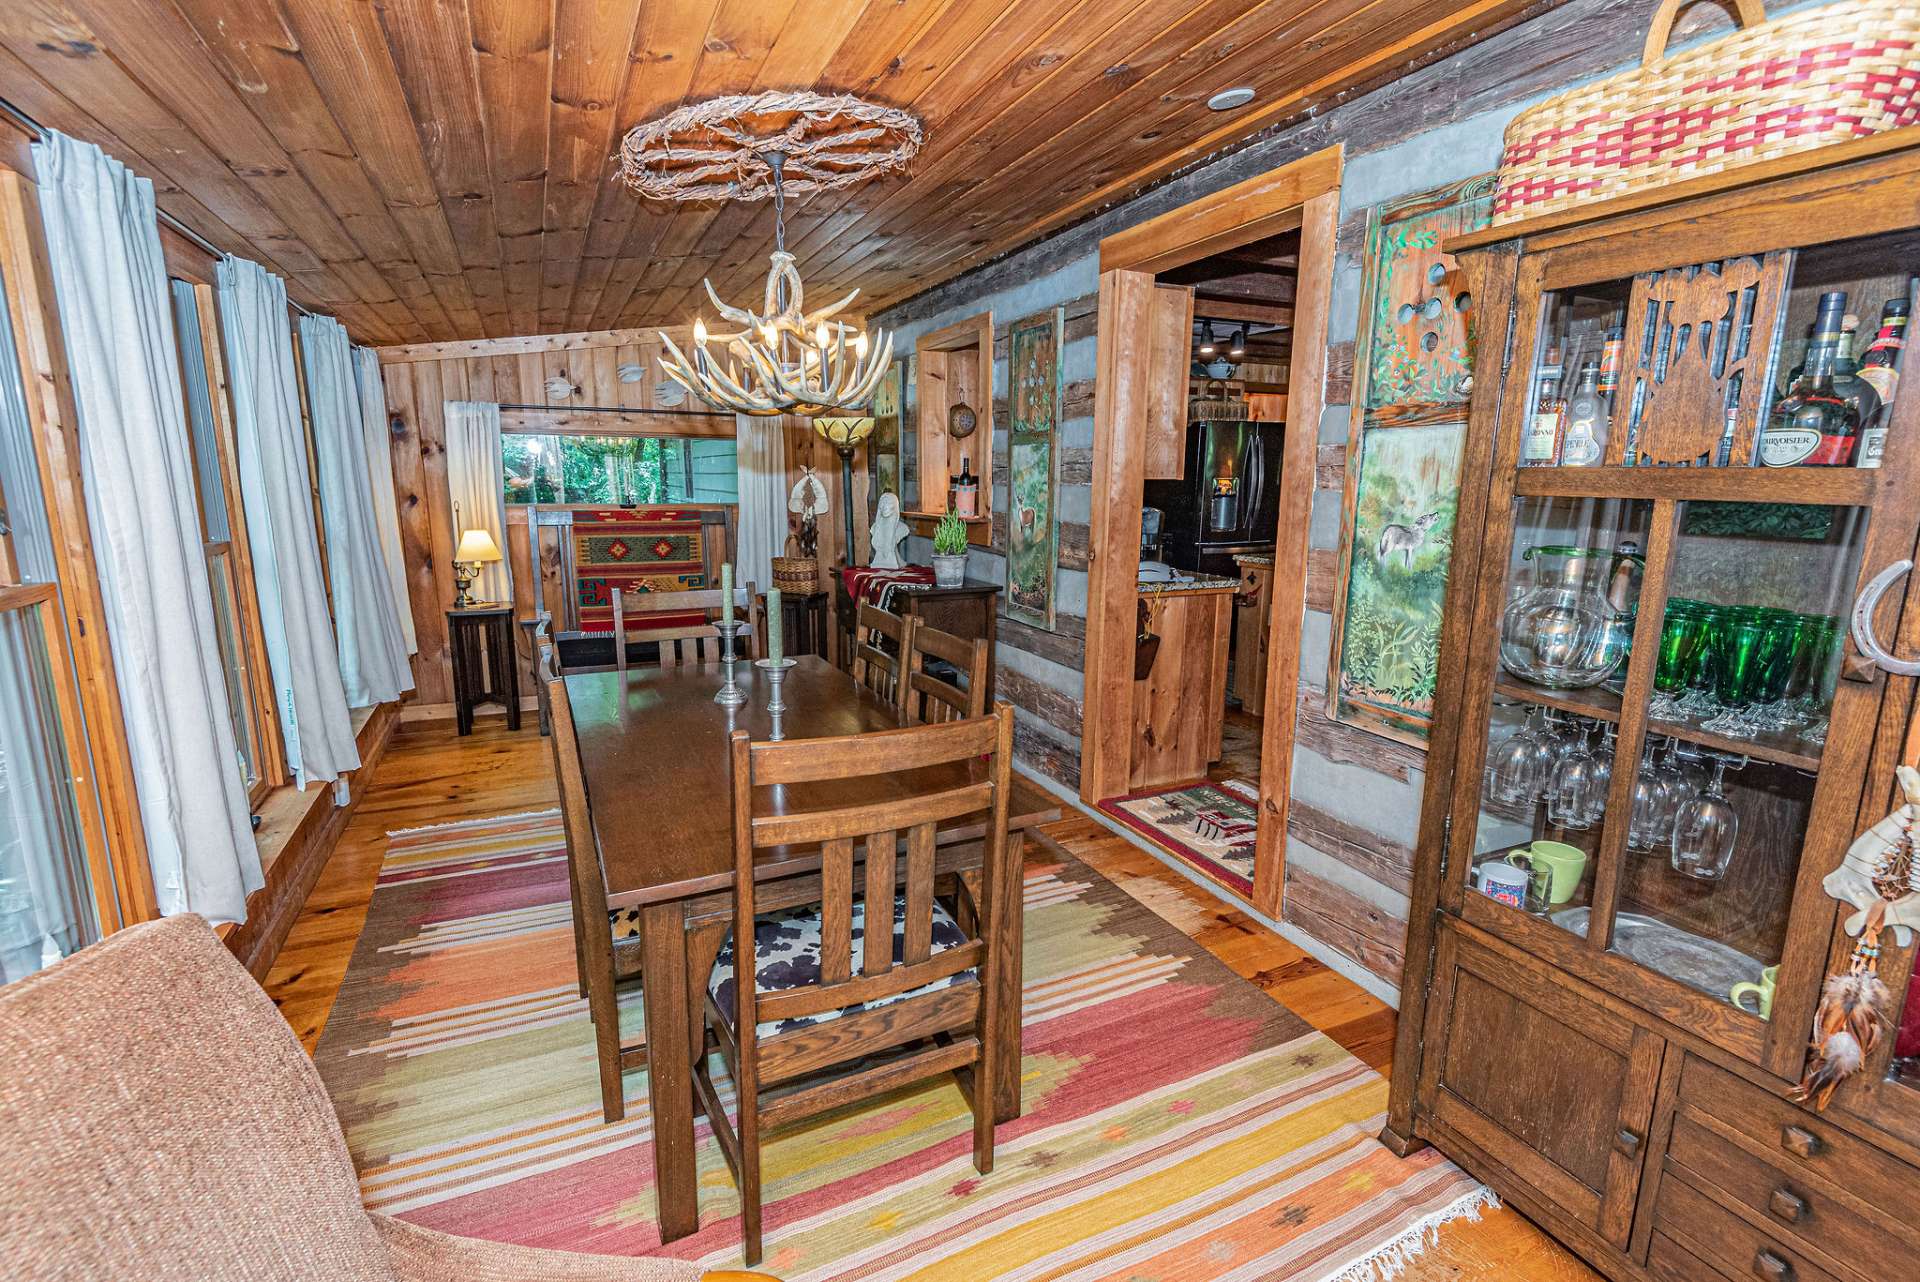 Just off the kitchen is a large dining room and seating area with a cozy gas stove to warm up to during the winter months.